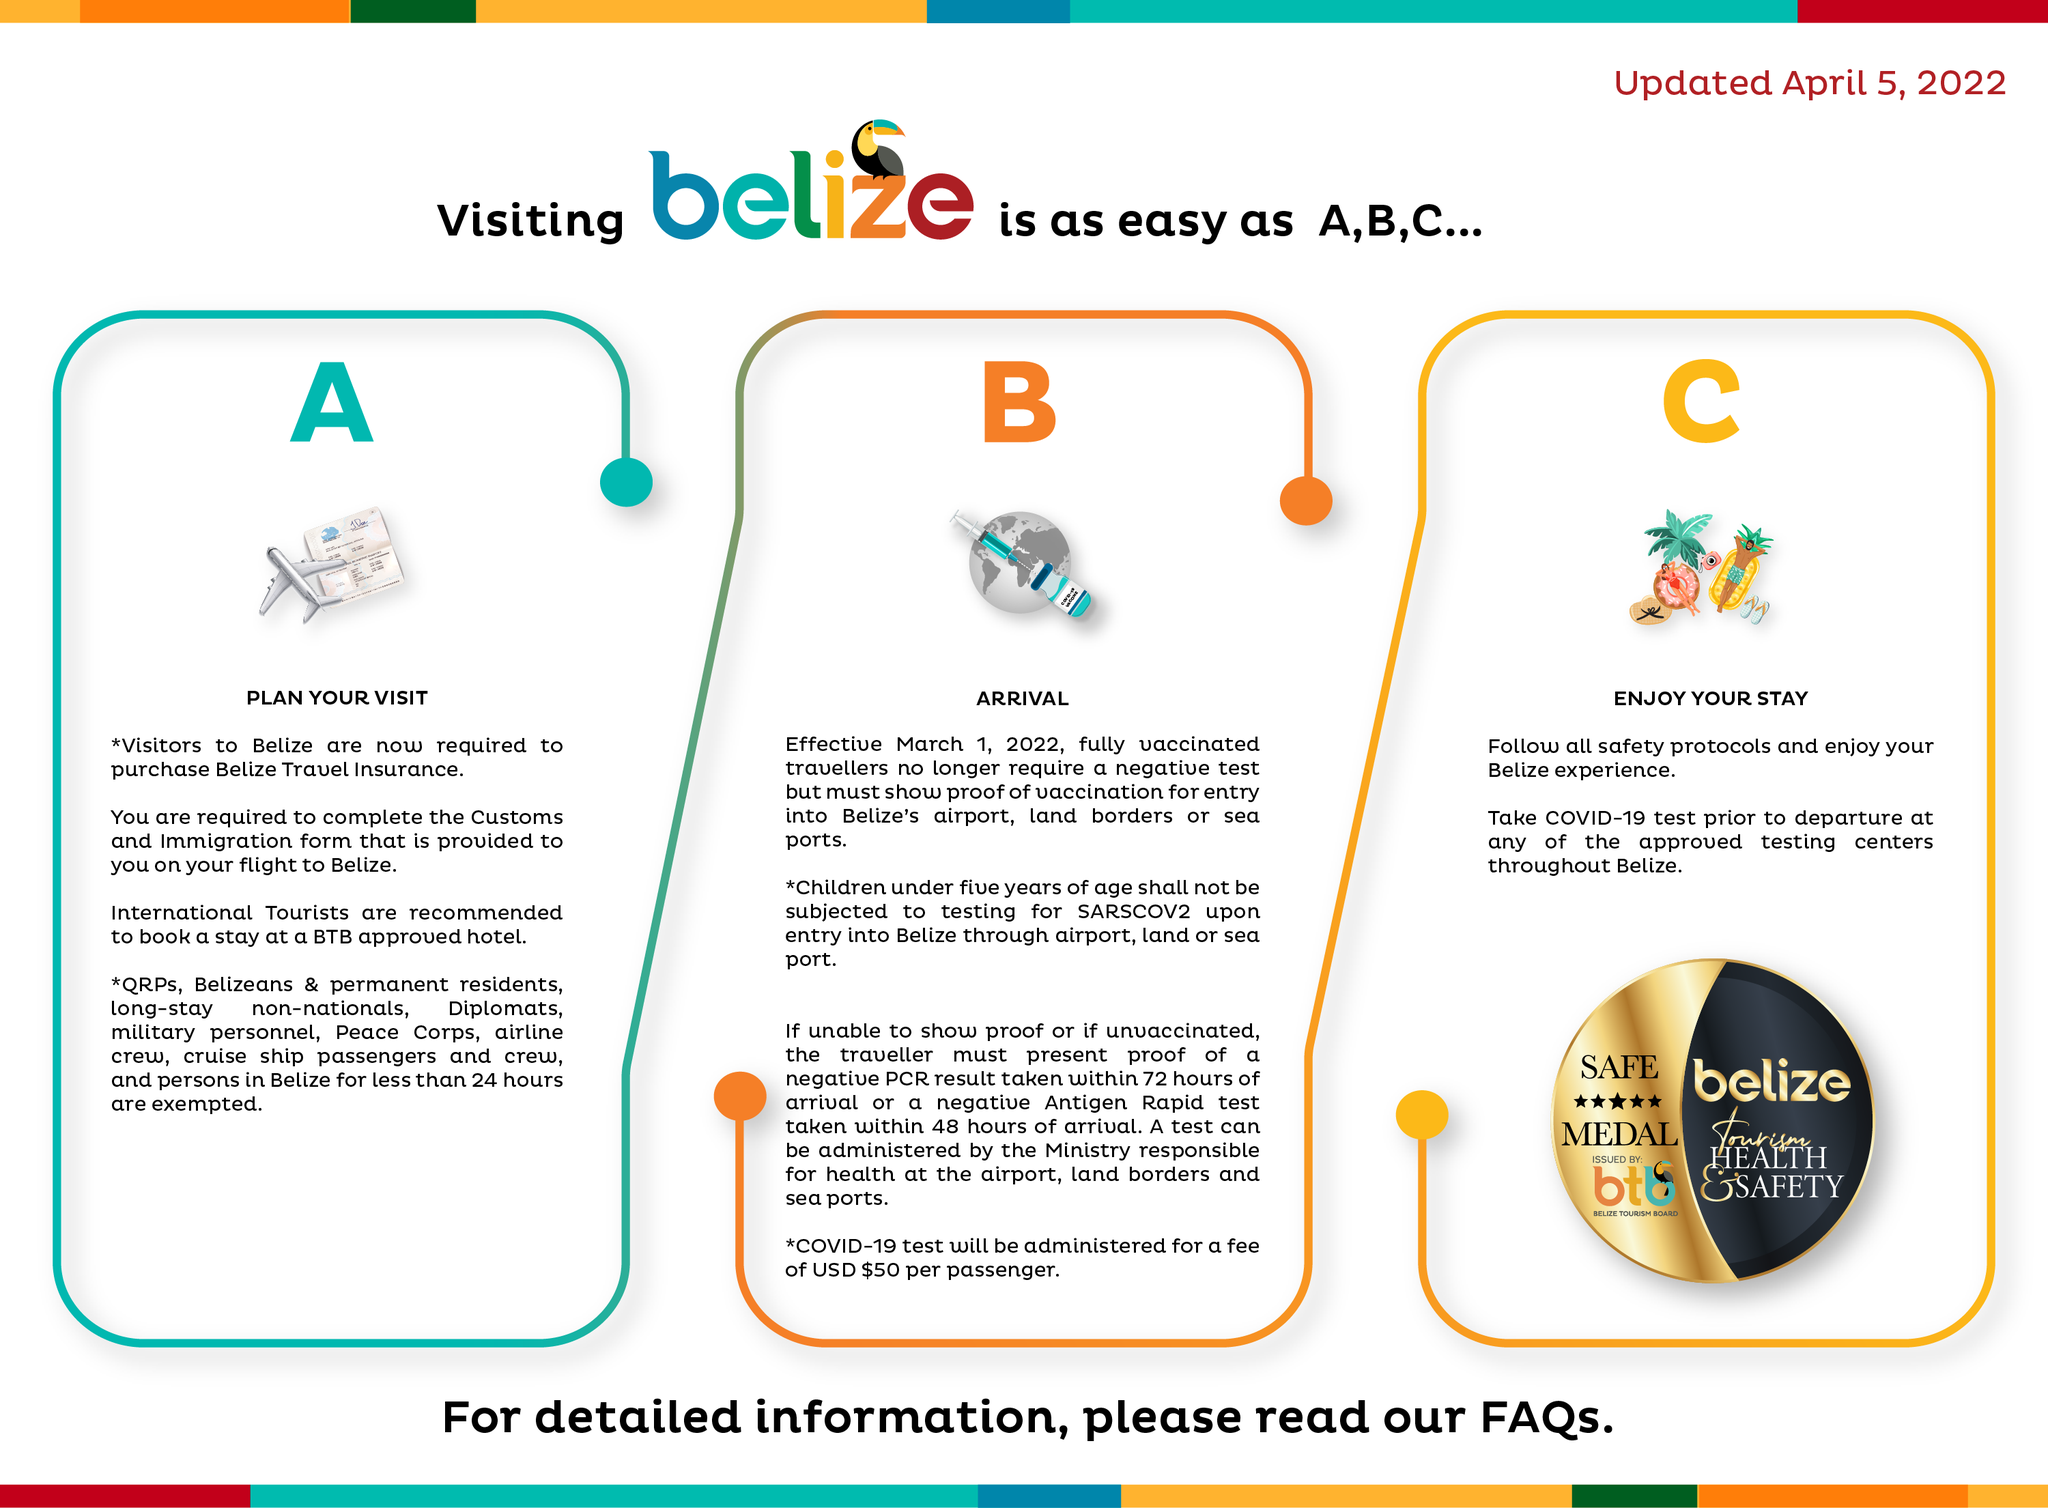 Infographic updated April 5 on entry requirements to Belize